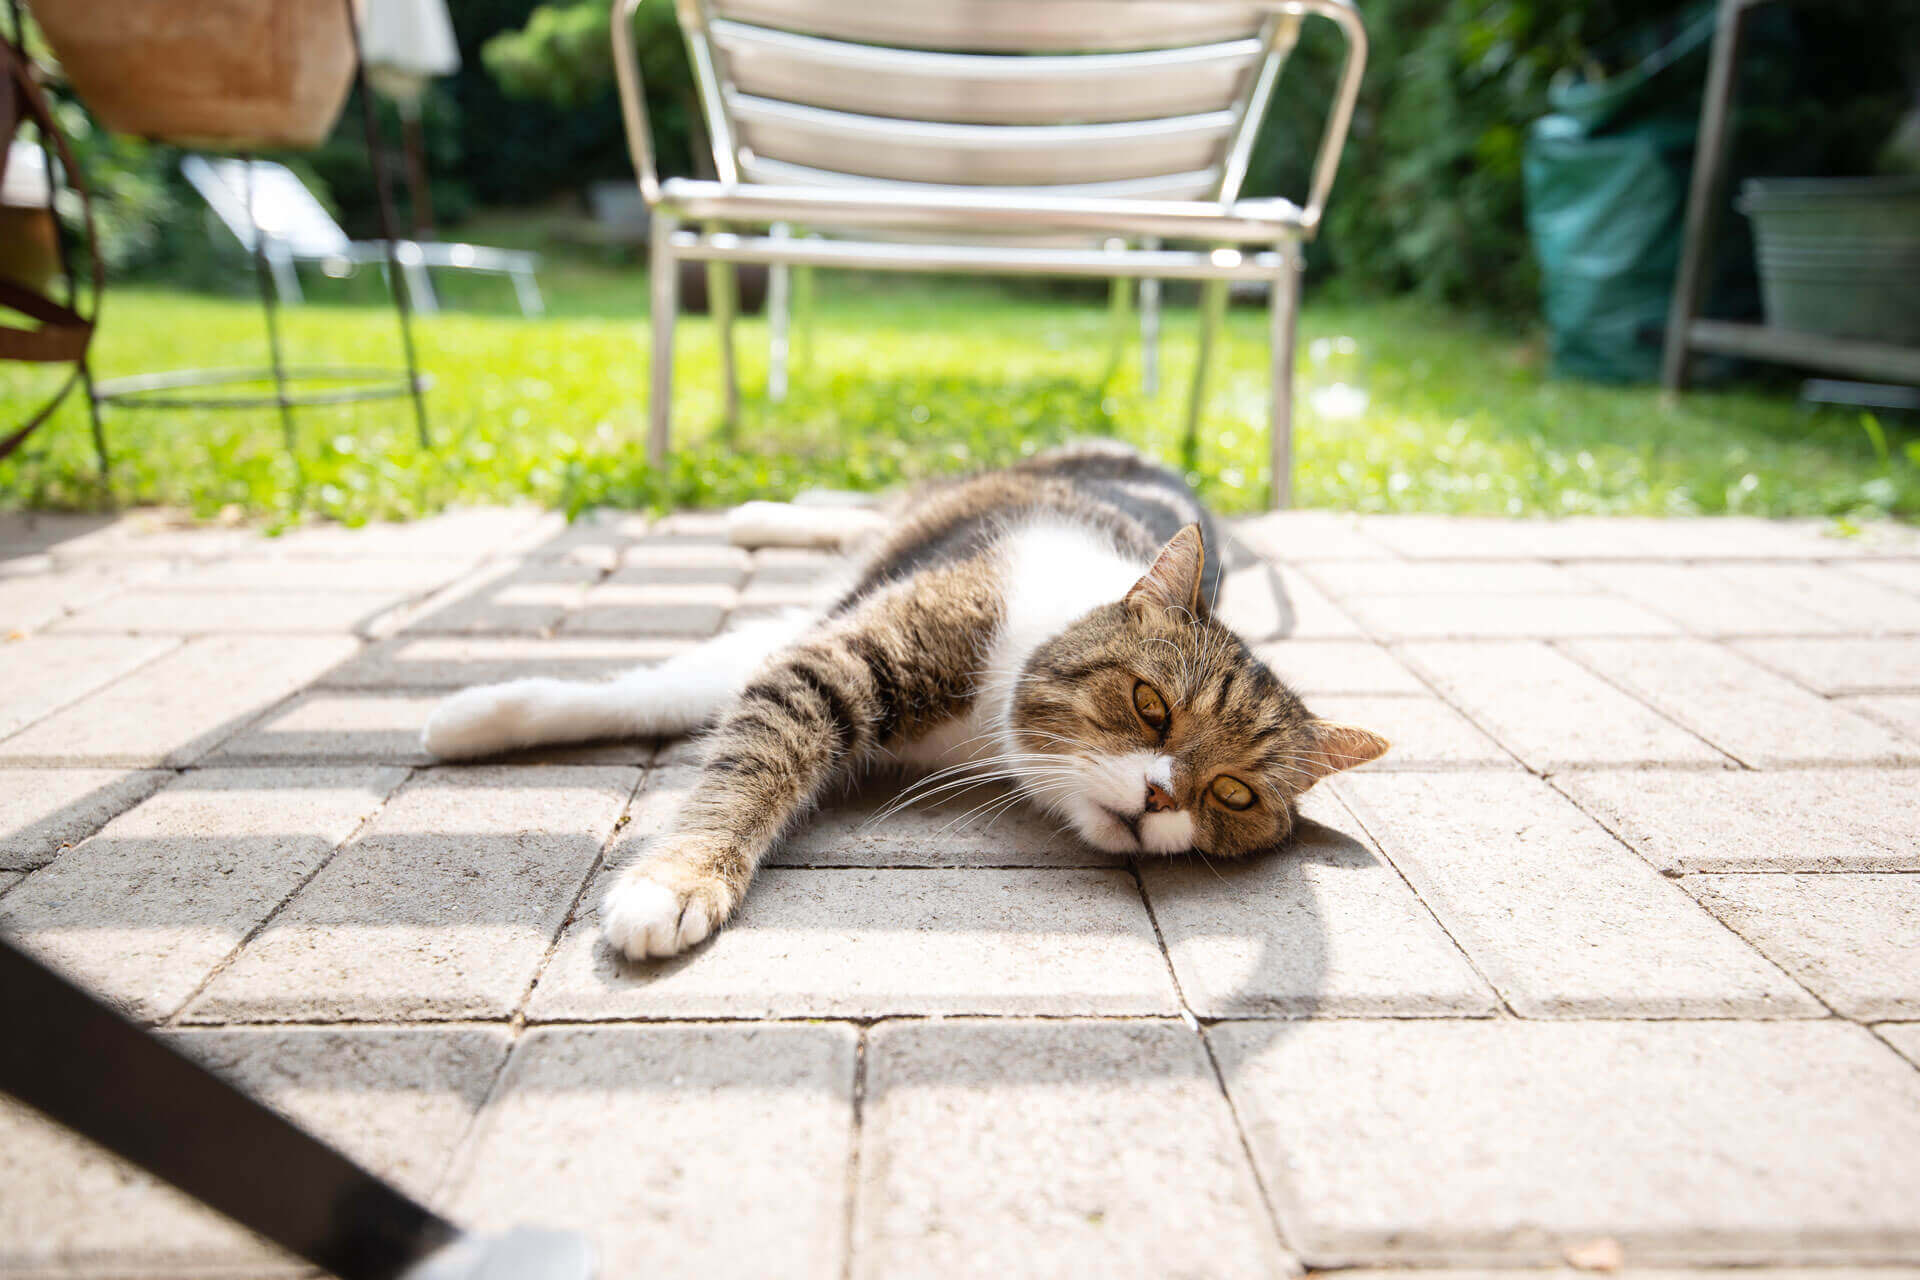 Heat Stroke In Cats: Common Causes And How To Help Your Cat To Cool Off